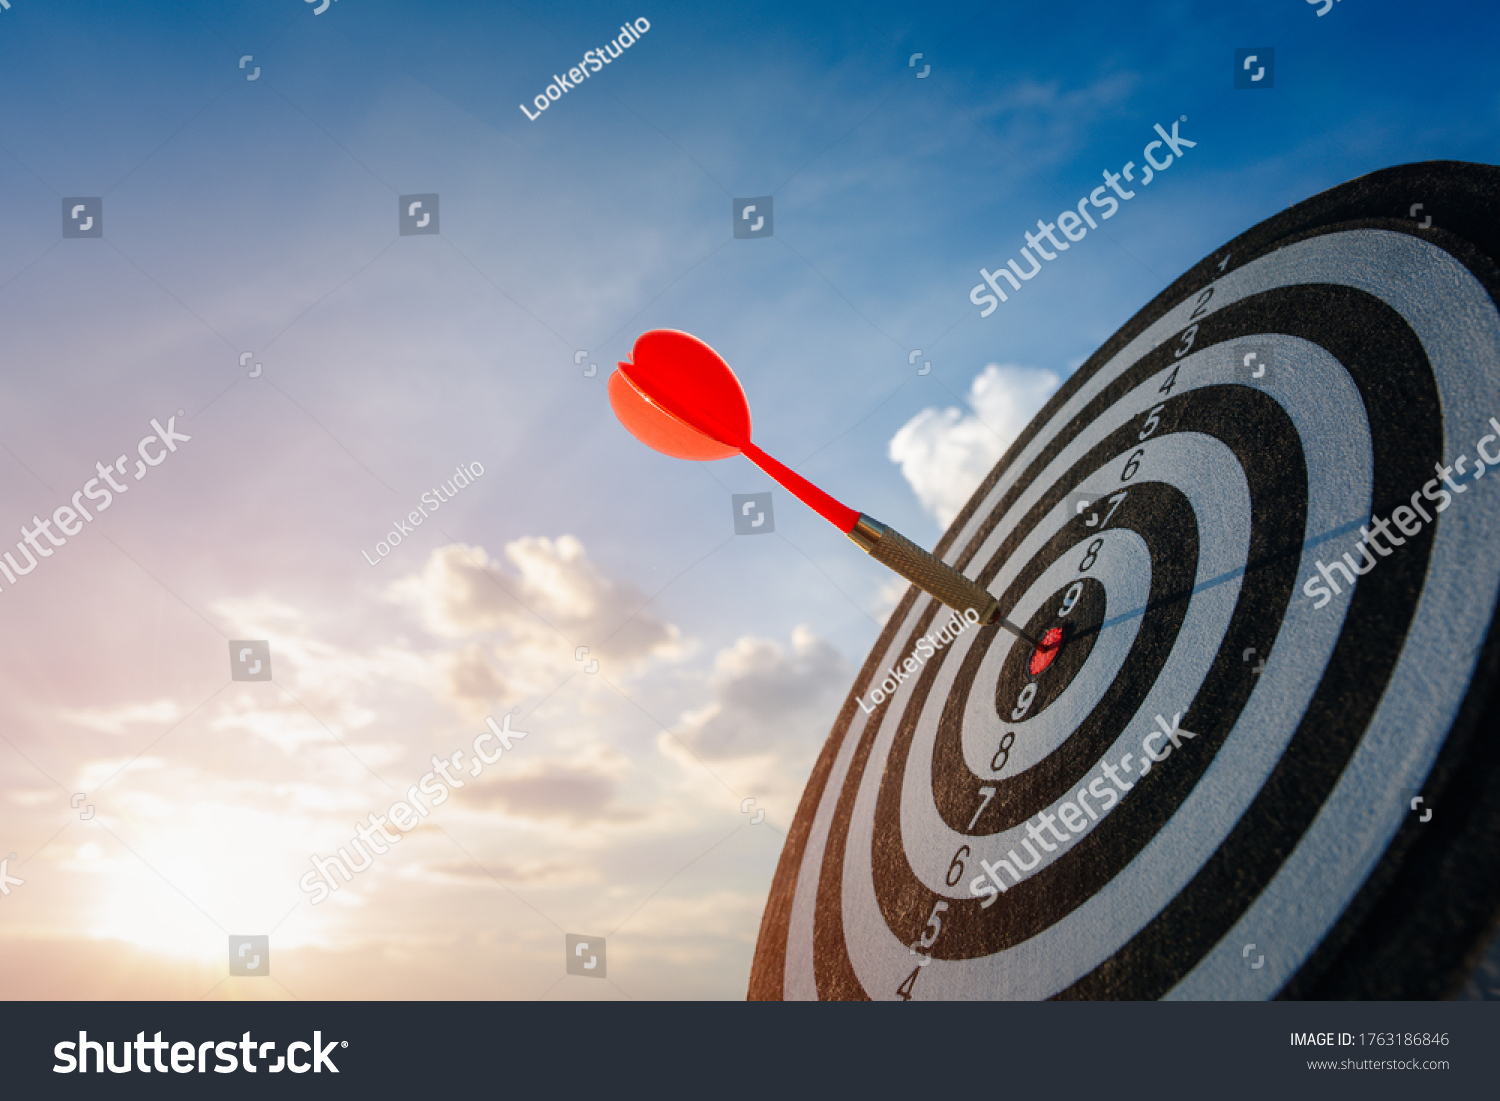 business marketing as concept. Red dart arrow hitting in the target center of dartboard Target hit in the center. #1763186846